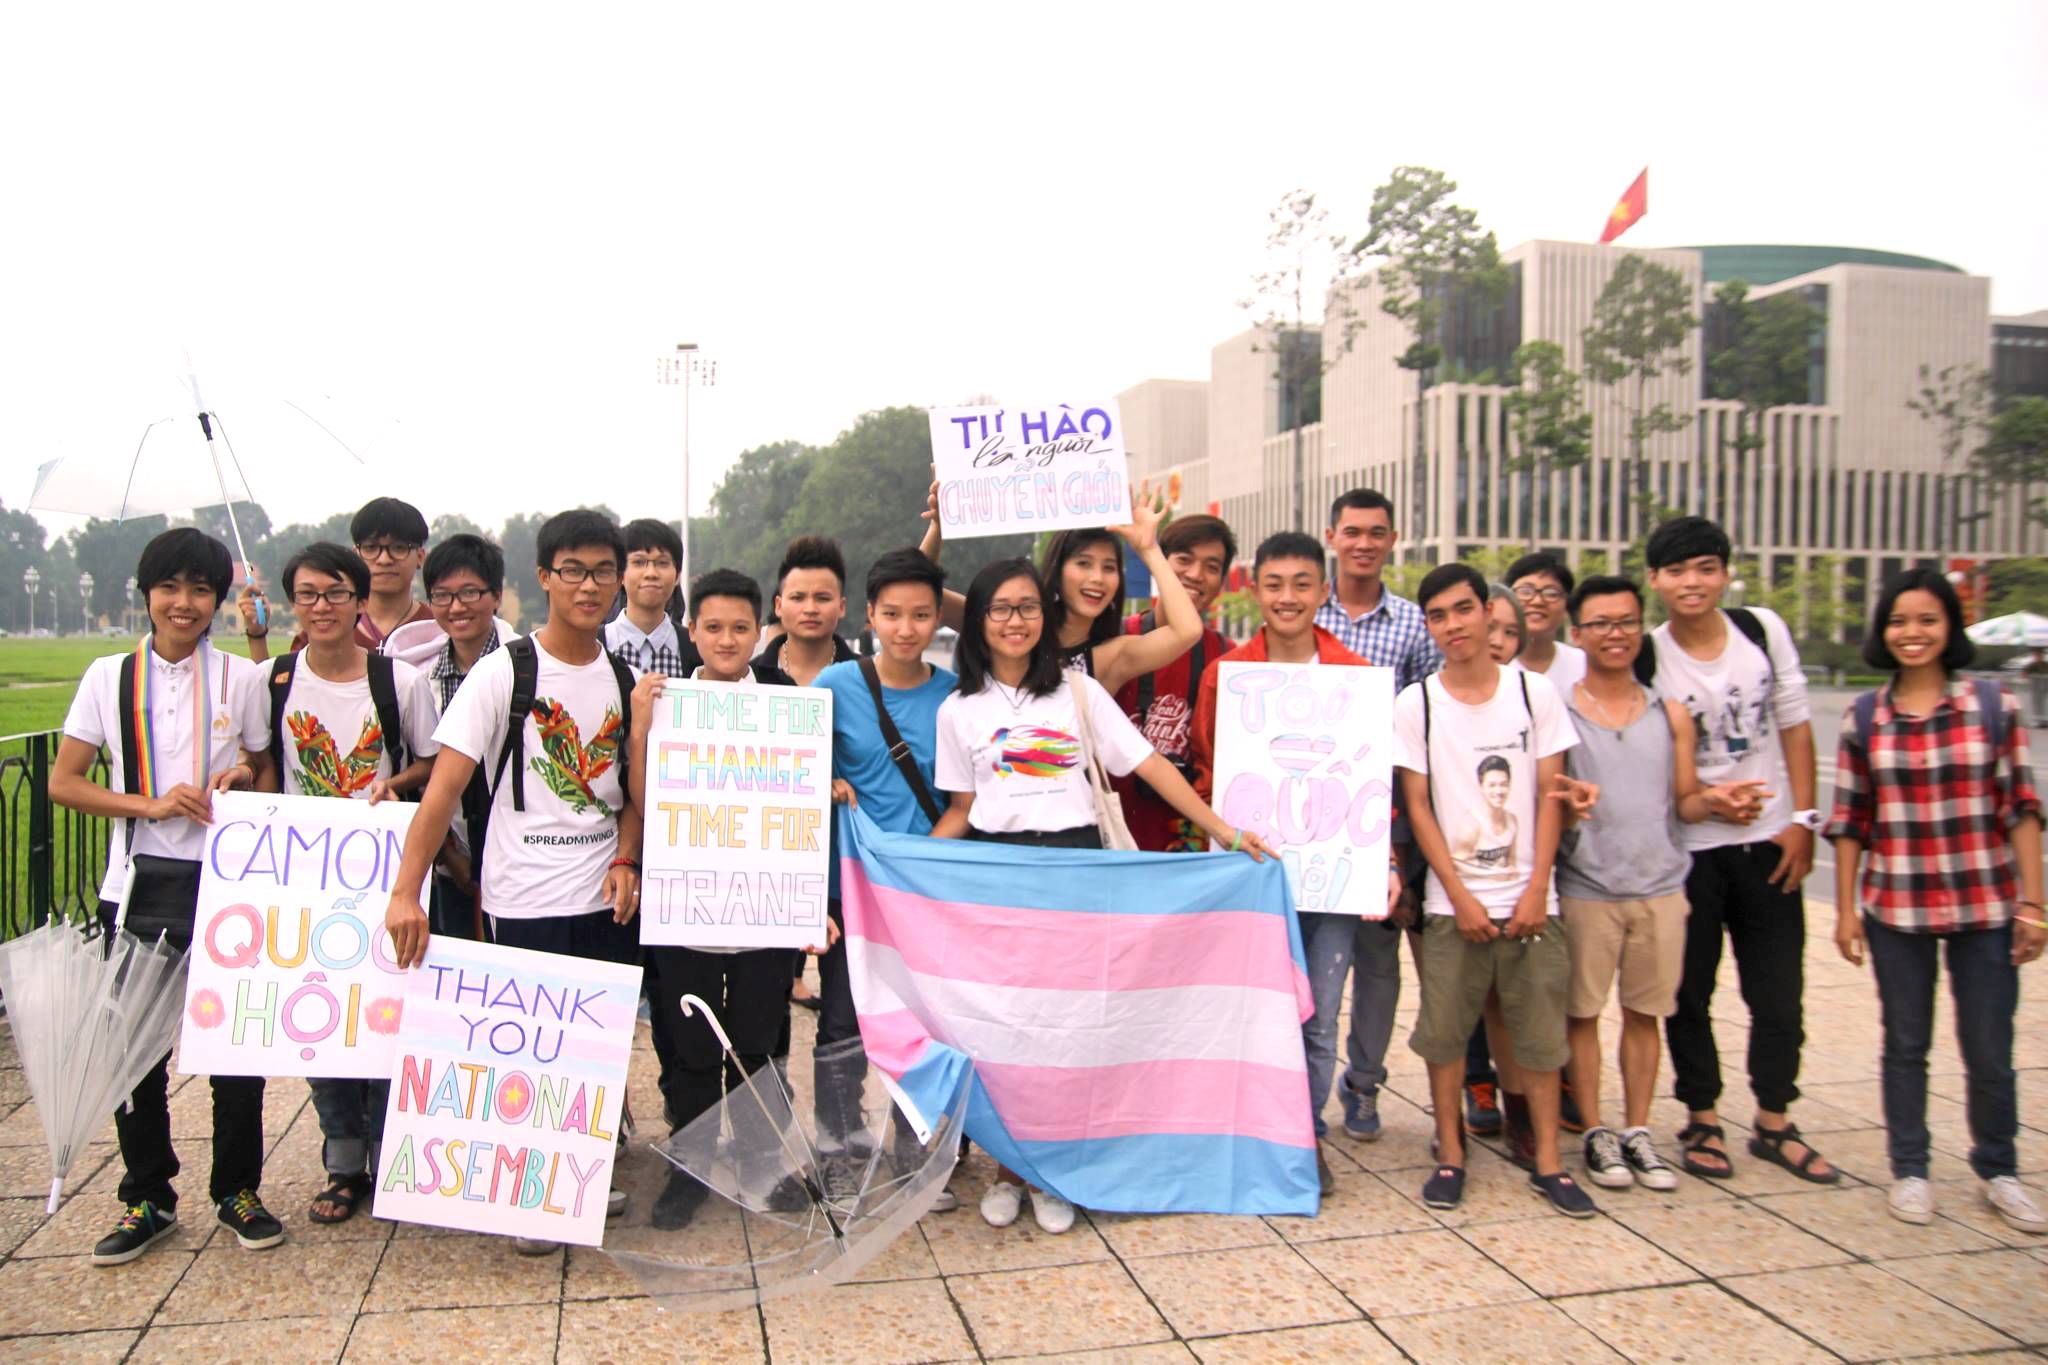 File:Many LGBT activists flock to the streets in Hanoi to applaud the new legislation. They raise flags and boards, some of which read “Cam on Quoc hoi” (Thank you, National Assembly). .jpg